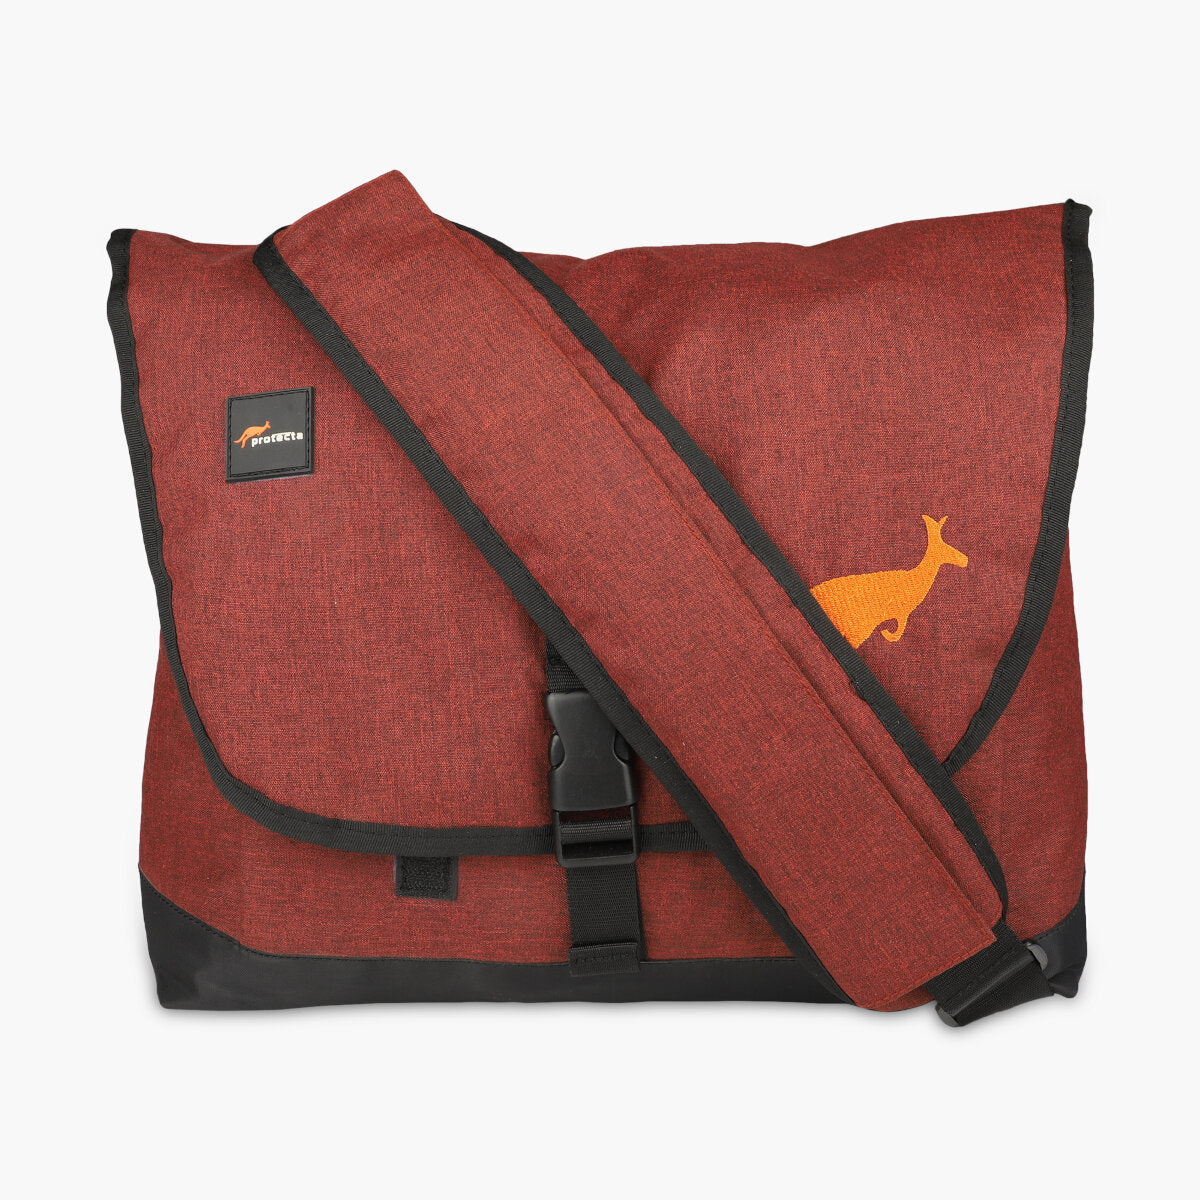 Rust Red, Protecta Leap Laptop Office Messenger Bag-6